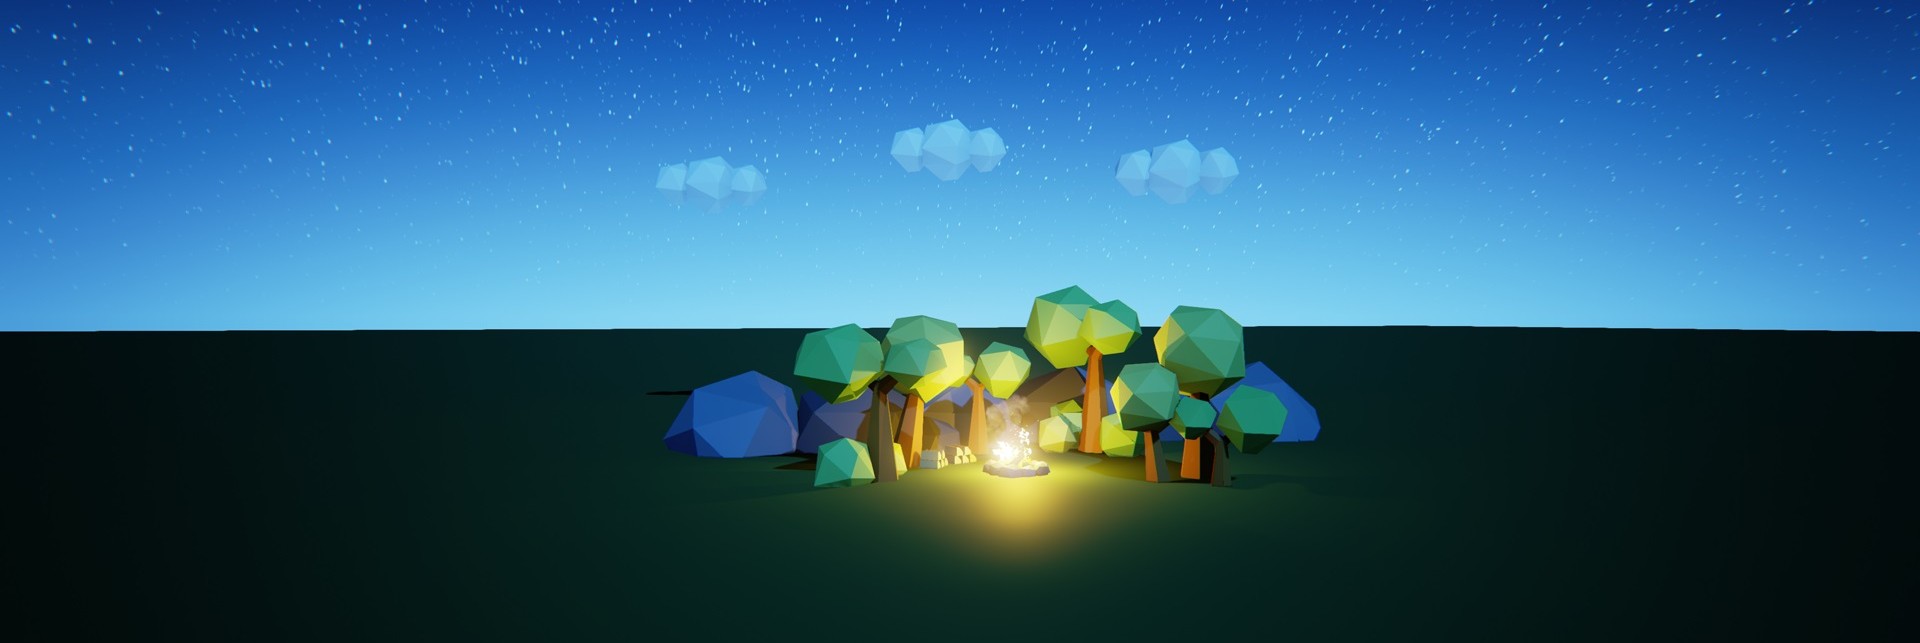 Low Poly Campfire Scene